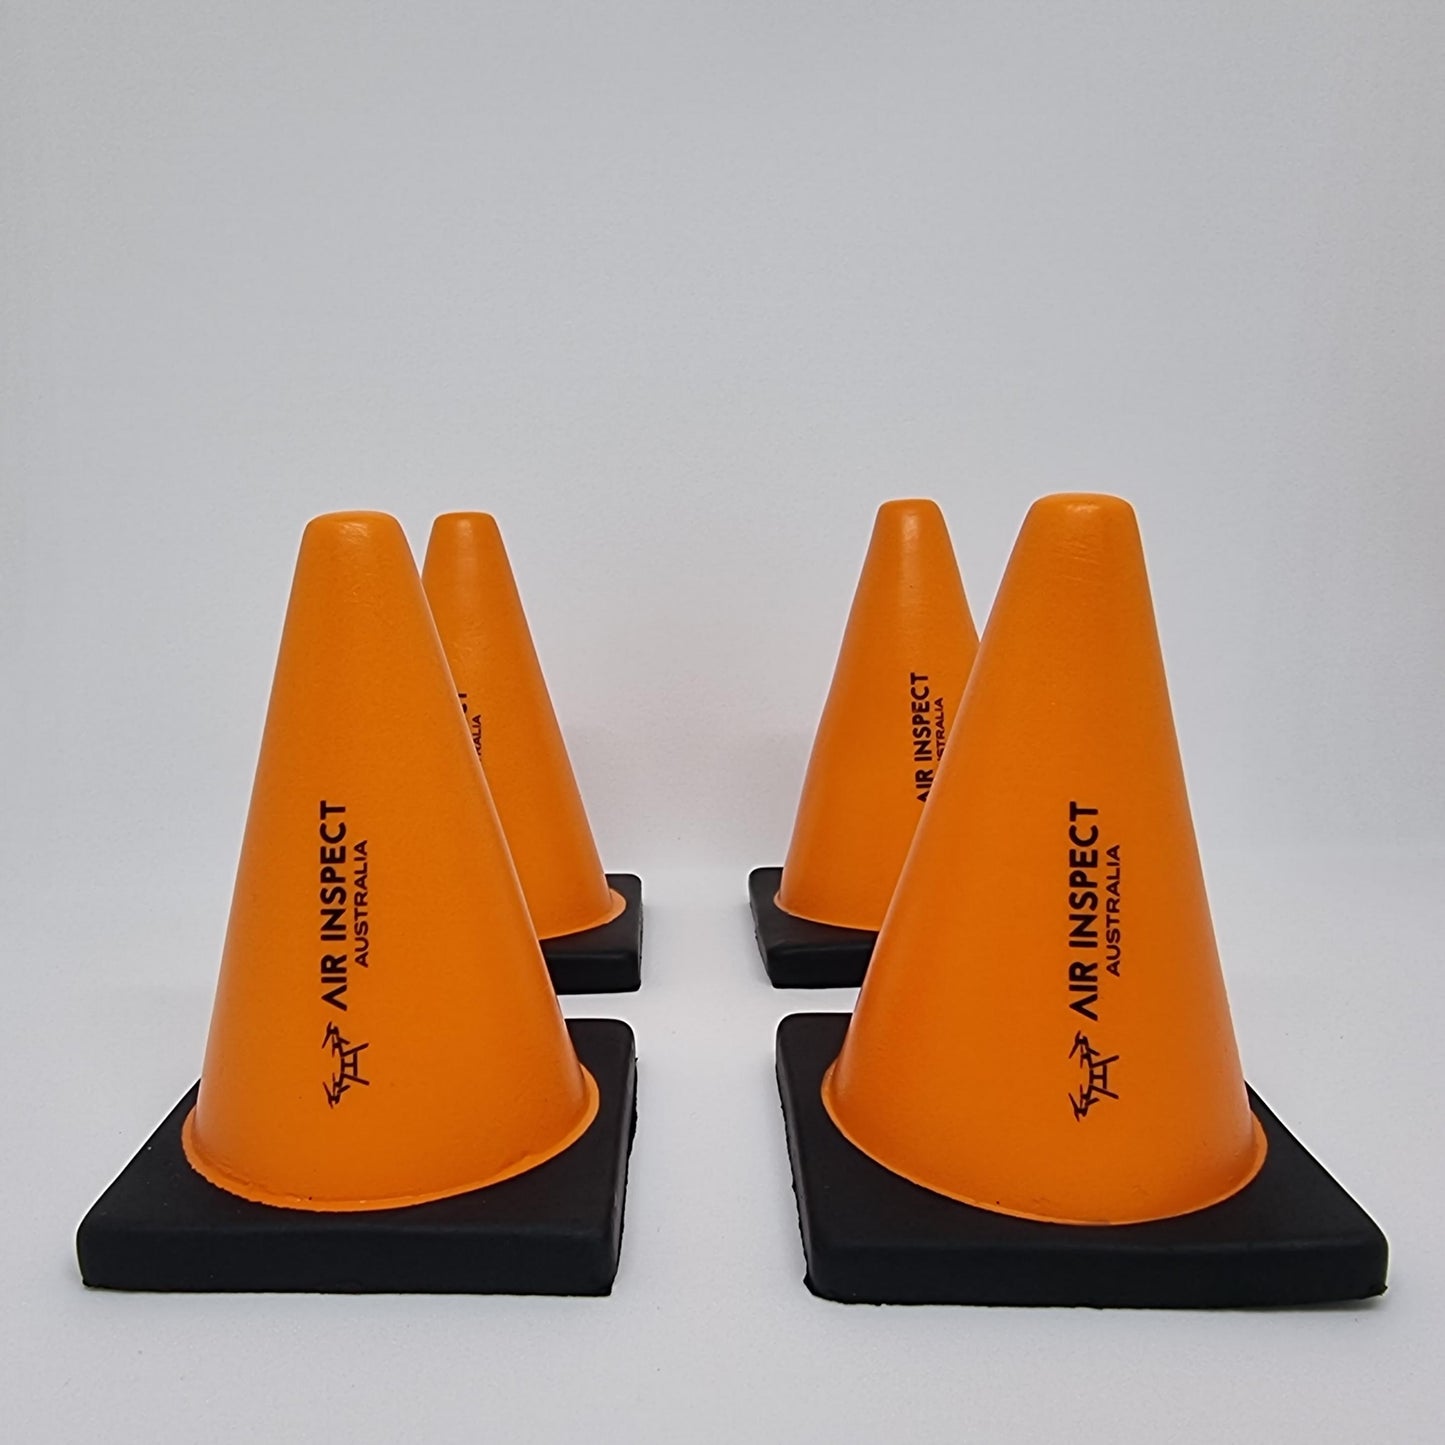 Stress Shaped Traffic Cone- 4 Pack